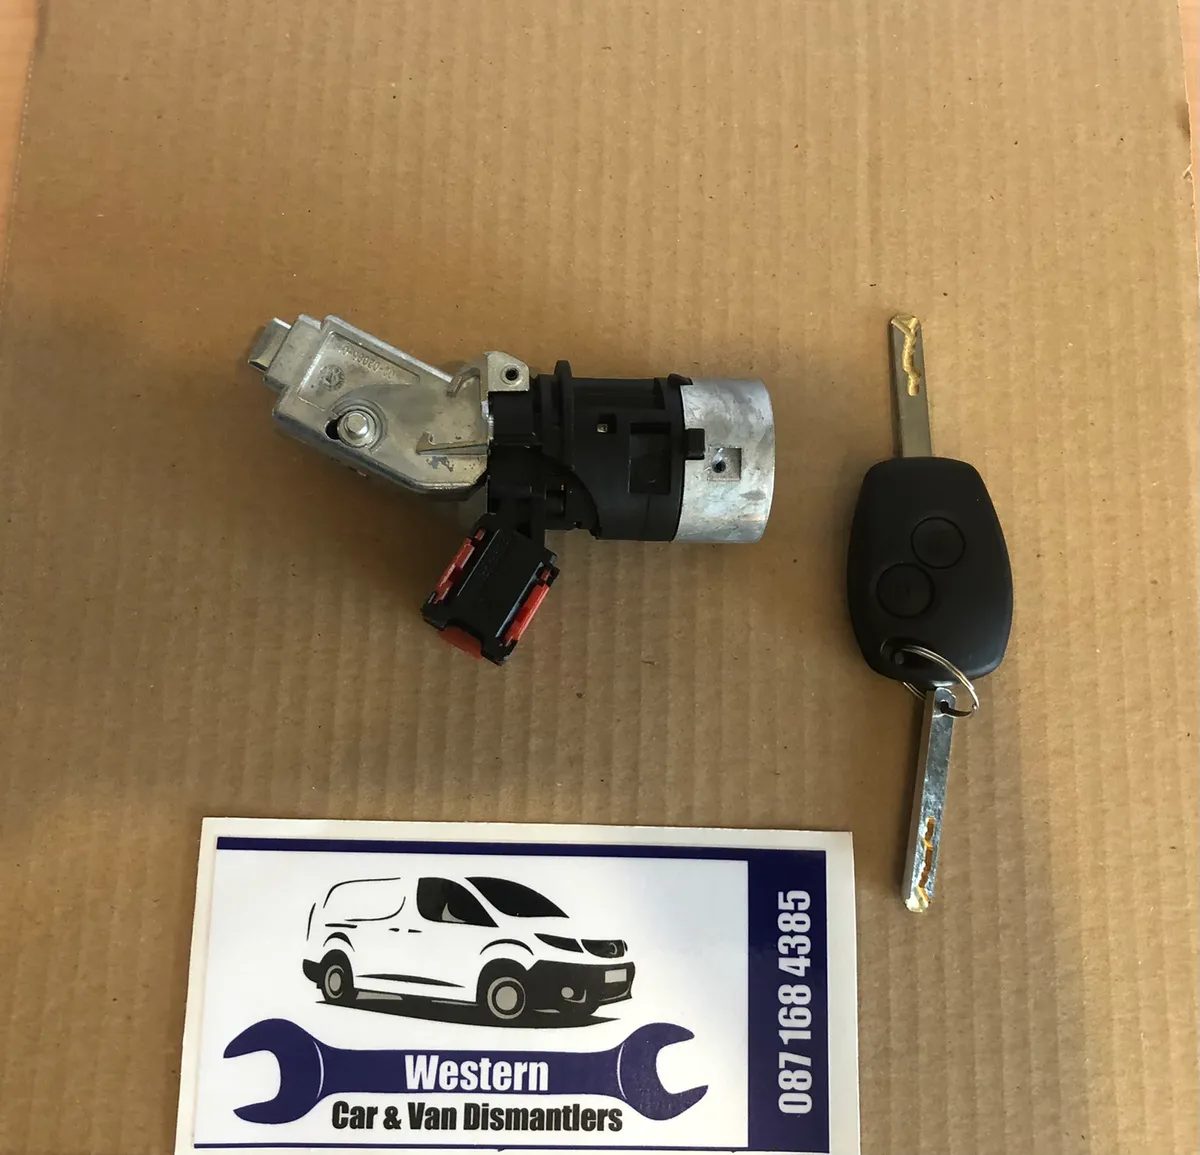 New Renault master ignition 2010 on